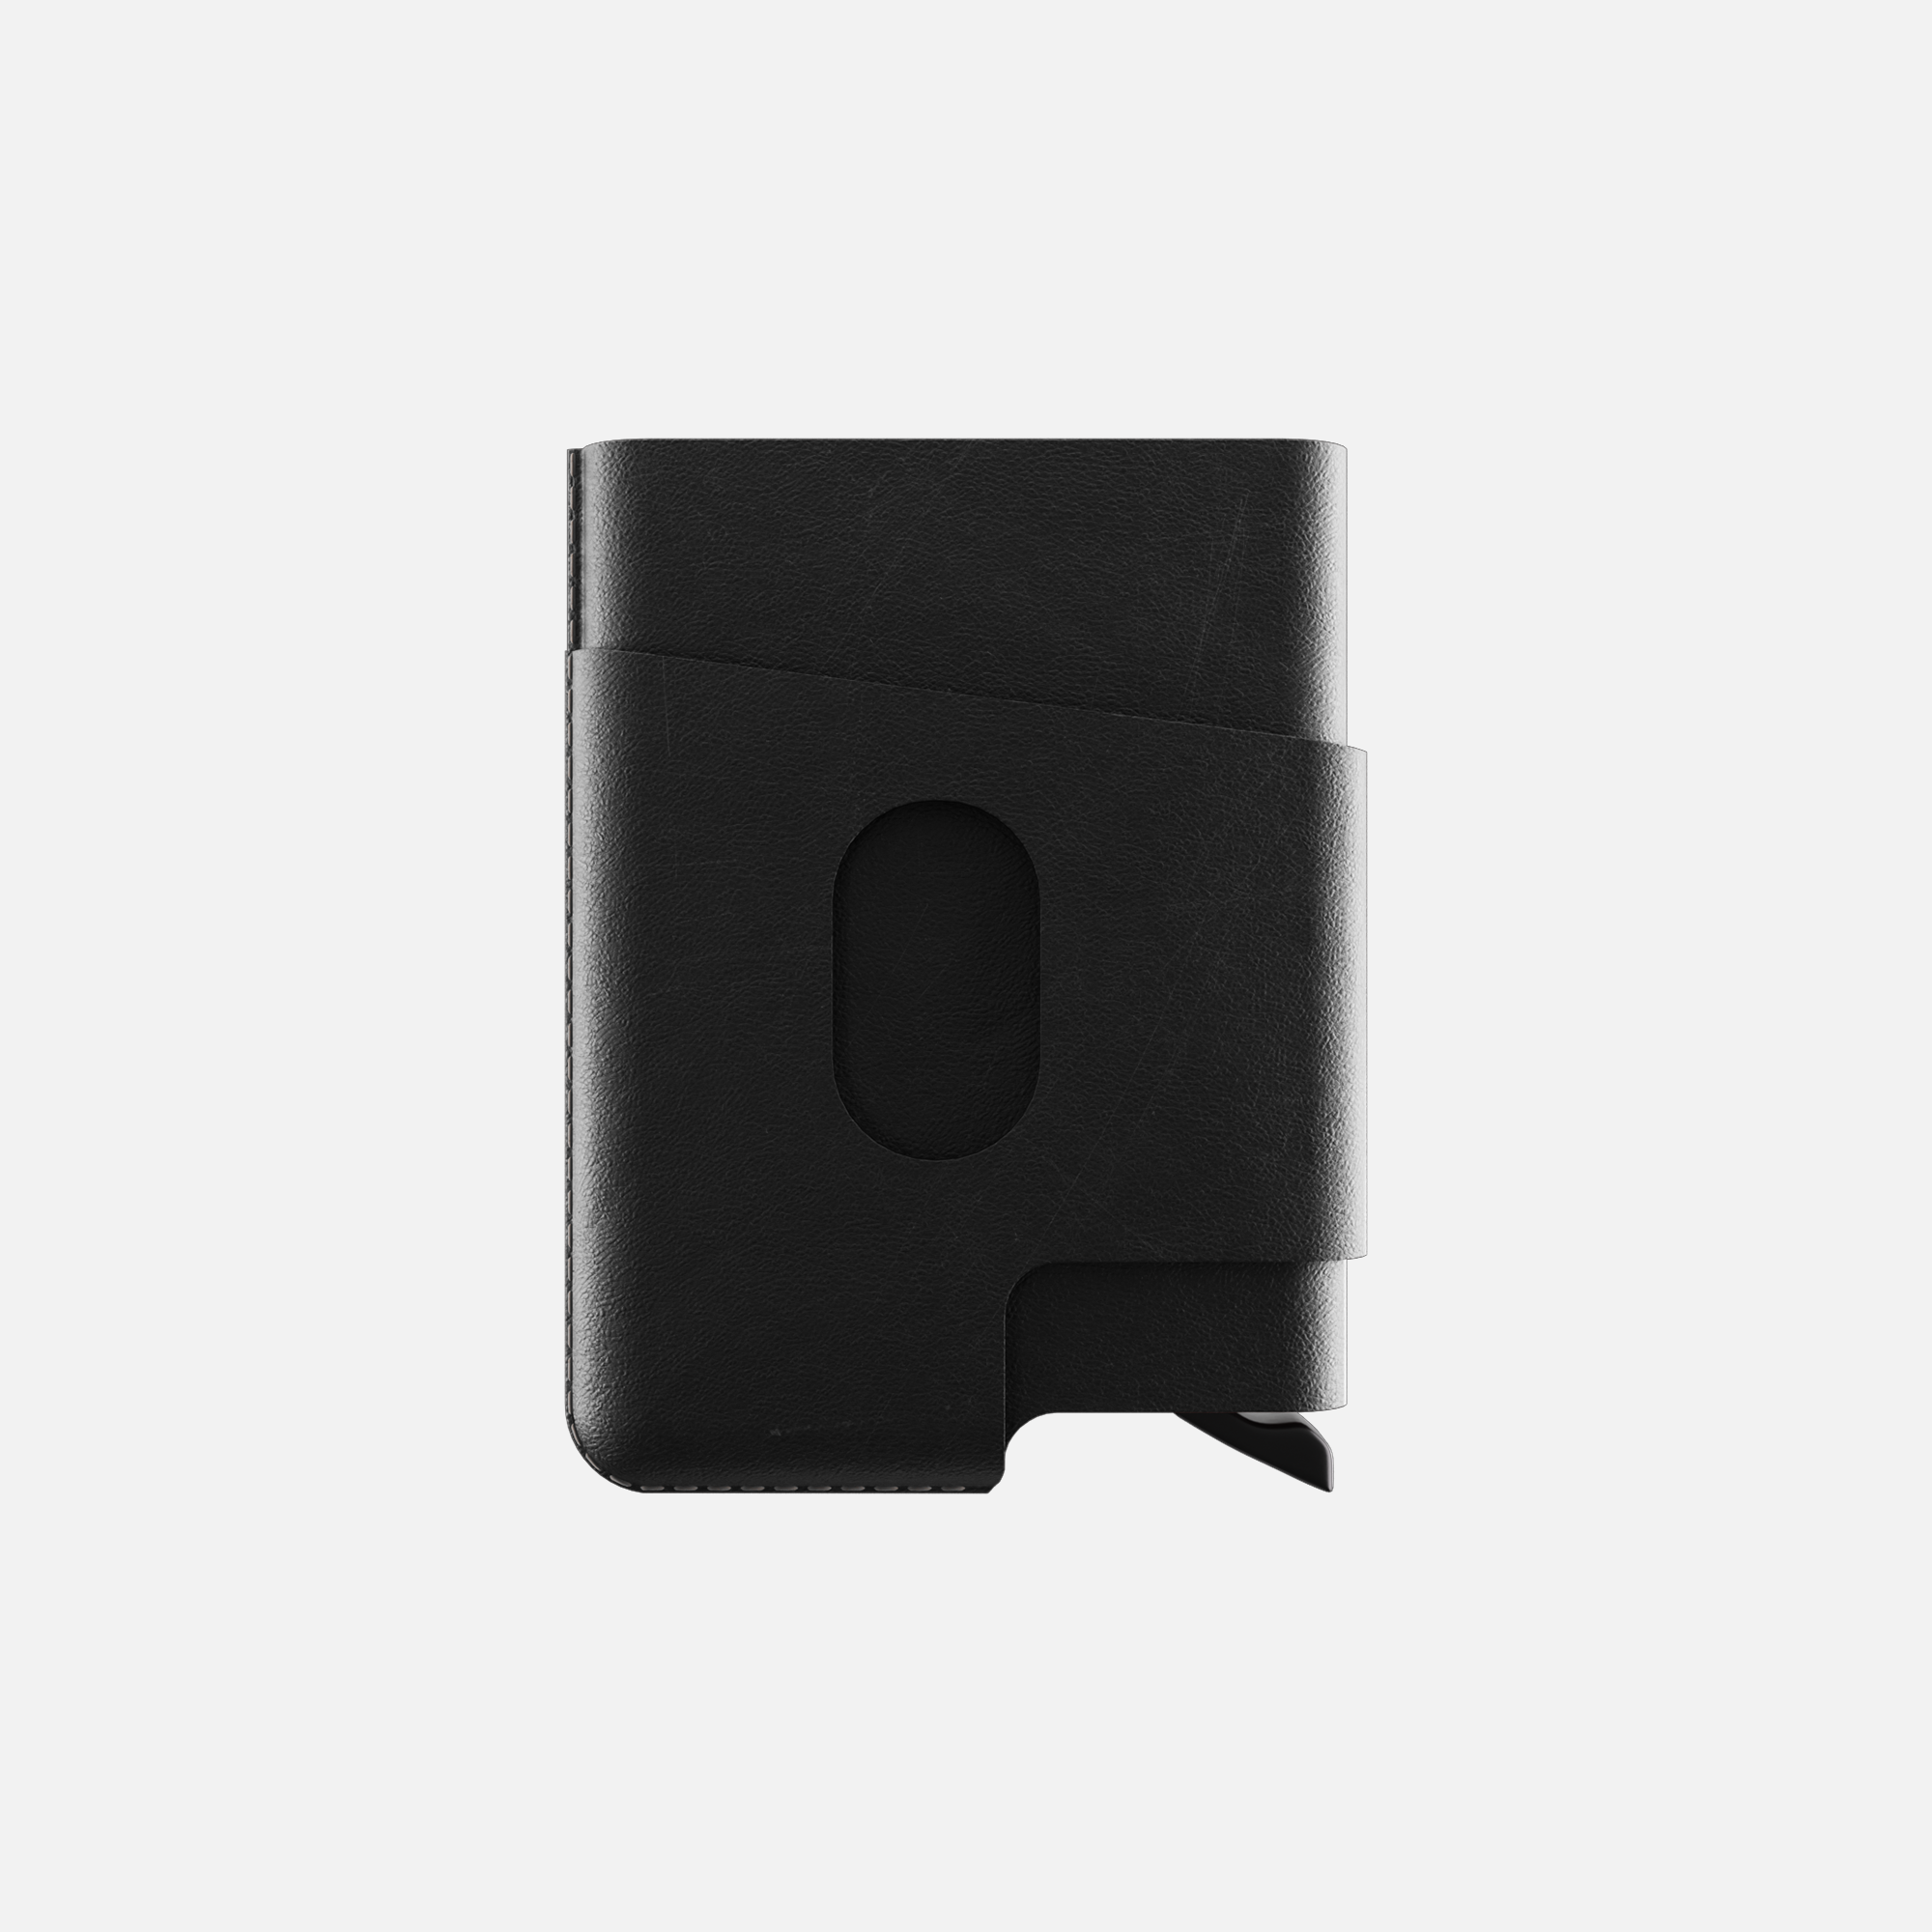 CUT-OUT Cardholder - RFID Block Featured - Handmade Natural Genuine Leather - Black